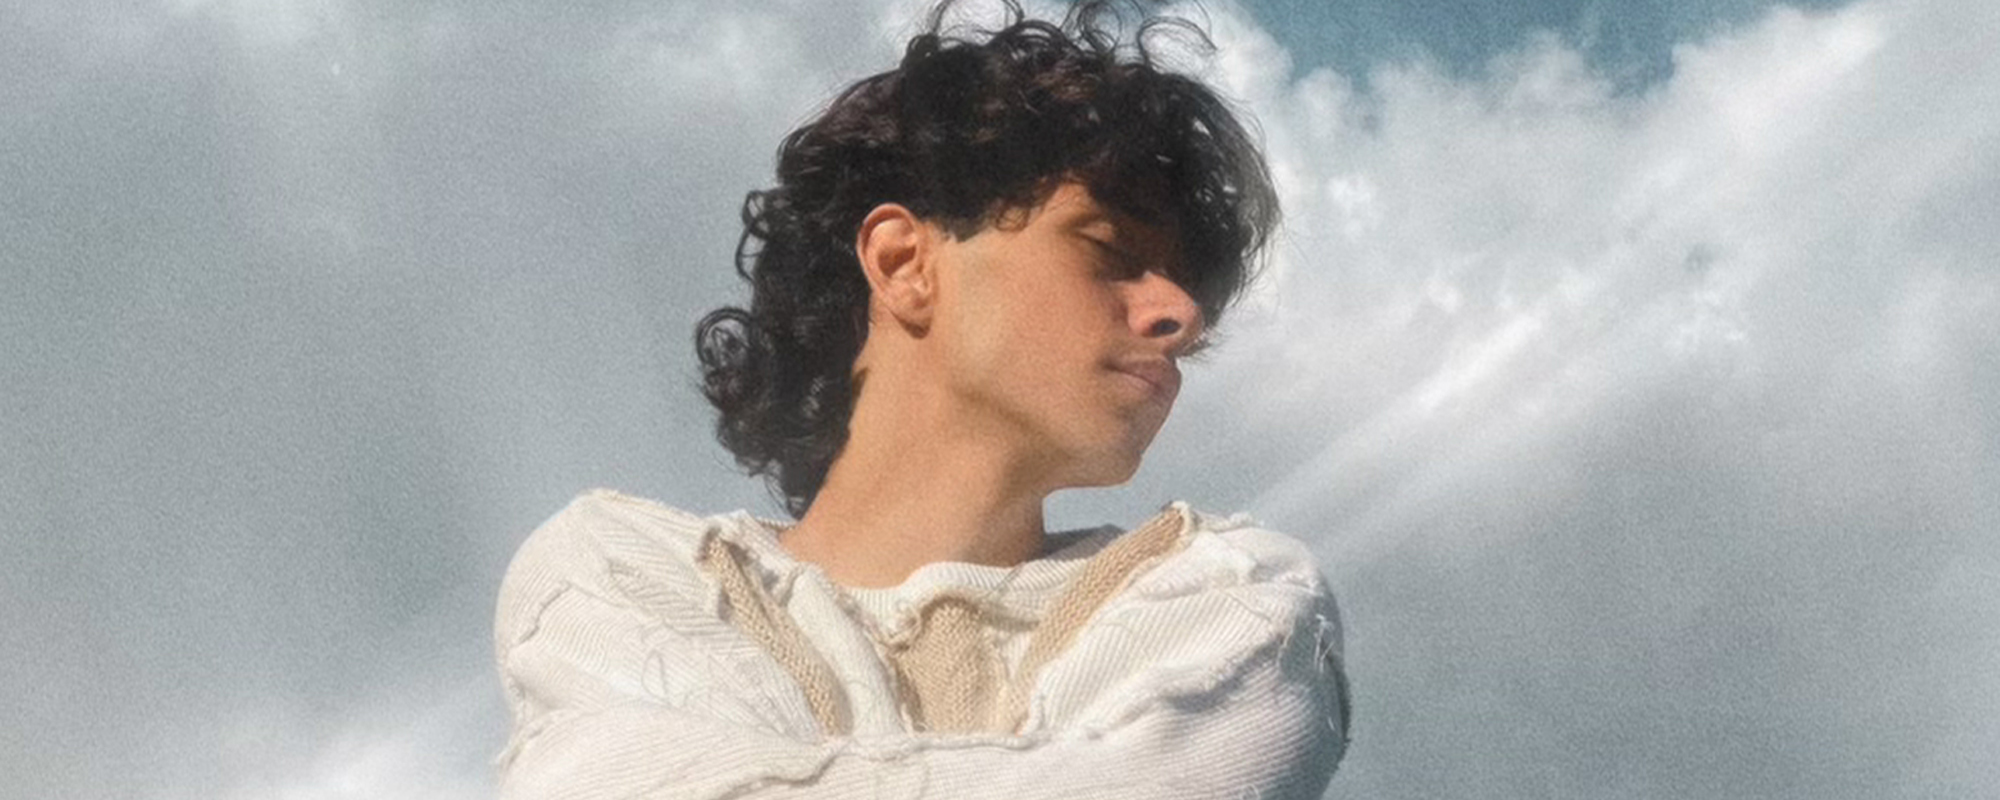 Justice Carradine Releases New, Vulnerable Single “Okay”